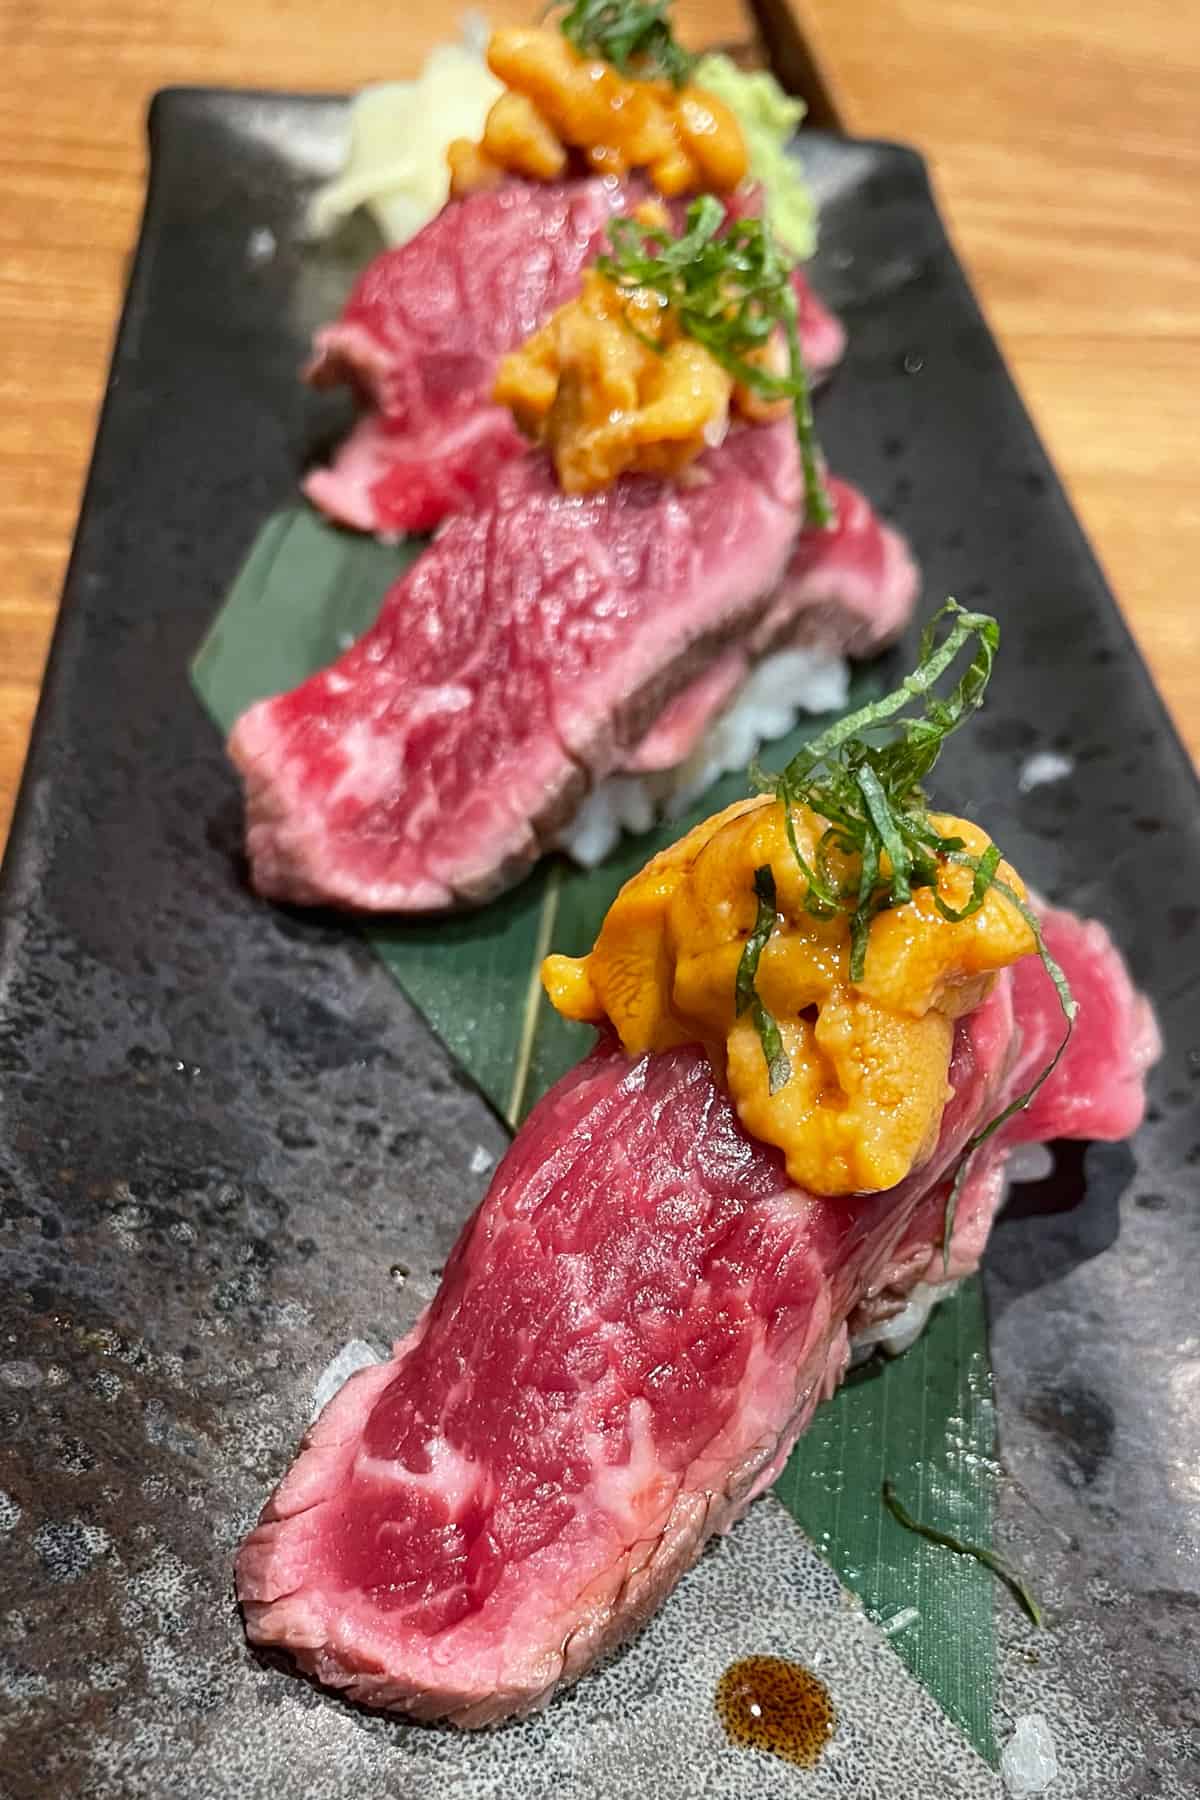 Beef and uni sushi on a long plate.